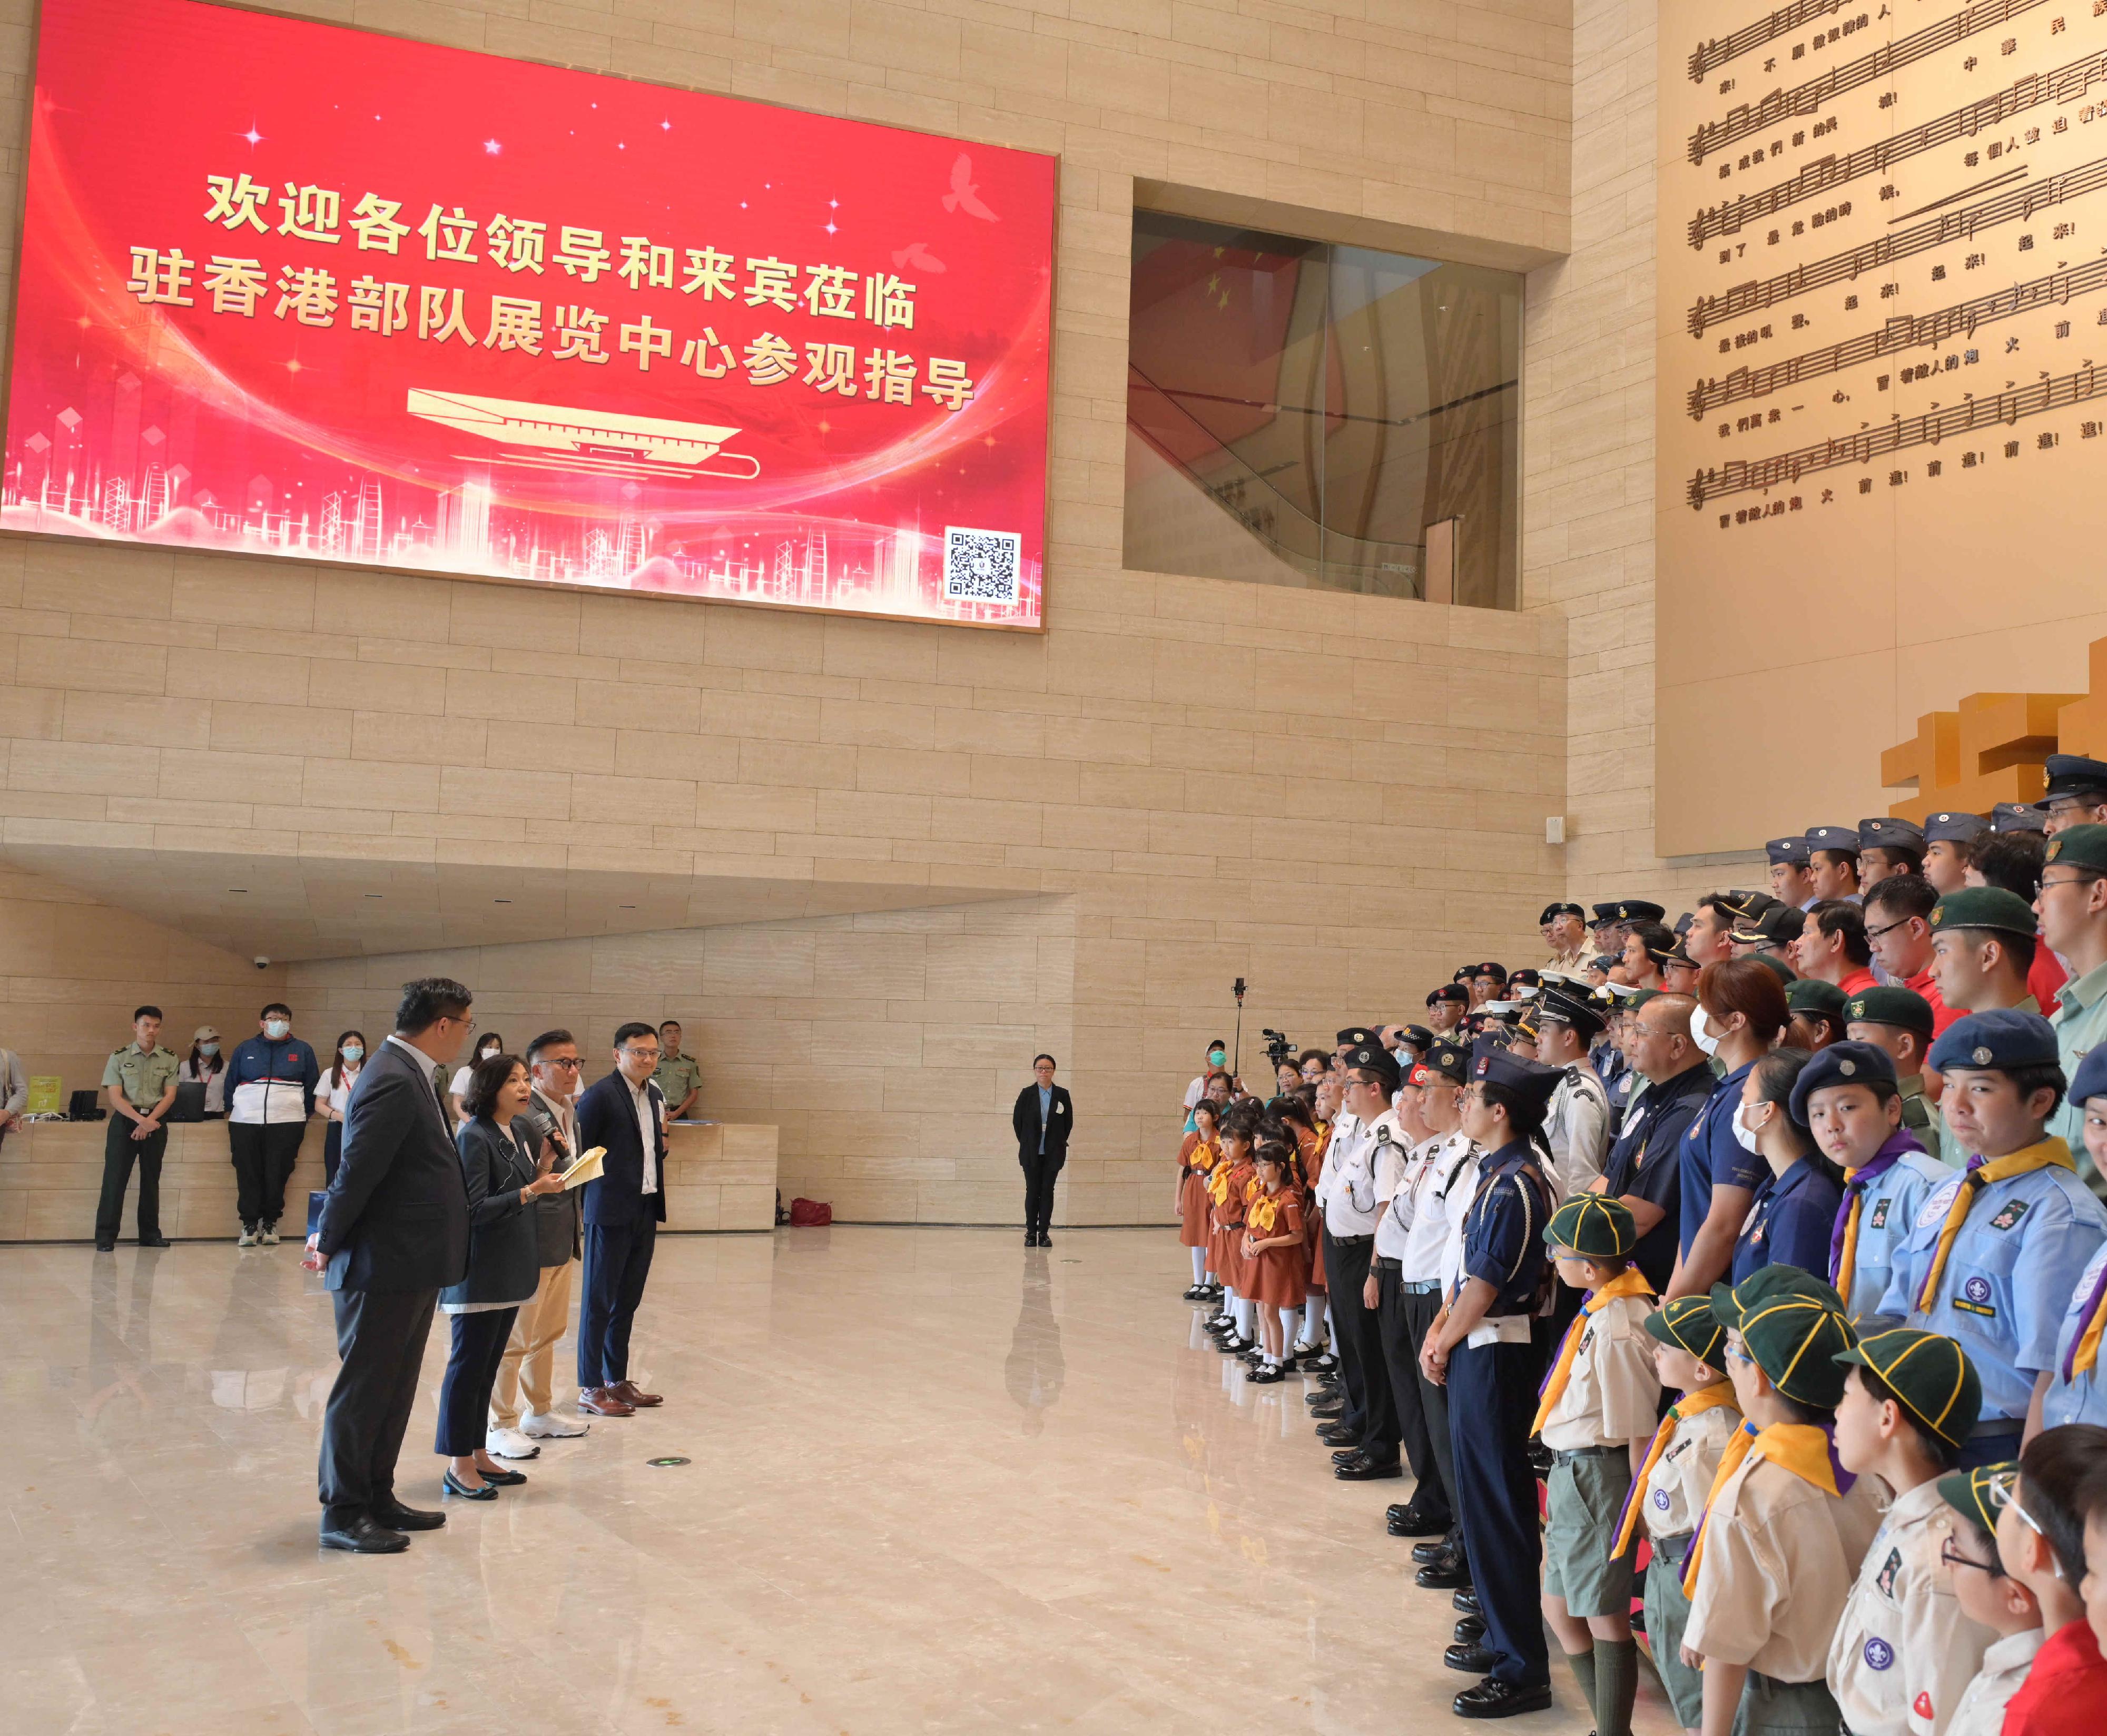 The Secretary for Home and Youth Affairs, Miss Alice Mak, today (August 30) led leaders and members of youth uniformed groups to visit the Chinese People's Liberation Army Hong Kong Garrison Exhibition Center at Ngong Shuen Chau Barracks. Photo shows Miss Mak (second left) delivering a speech.